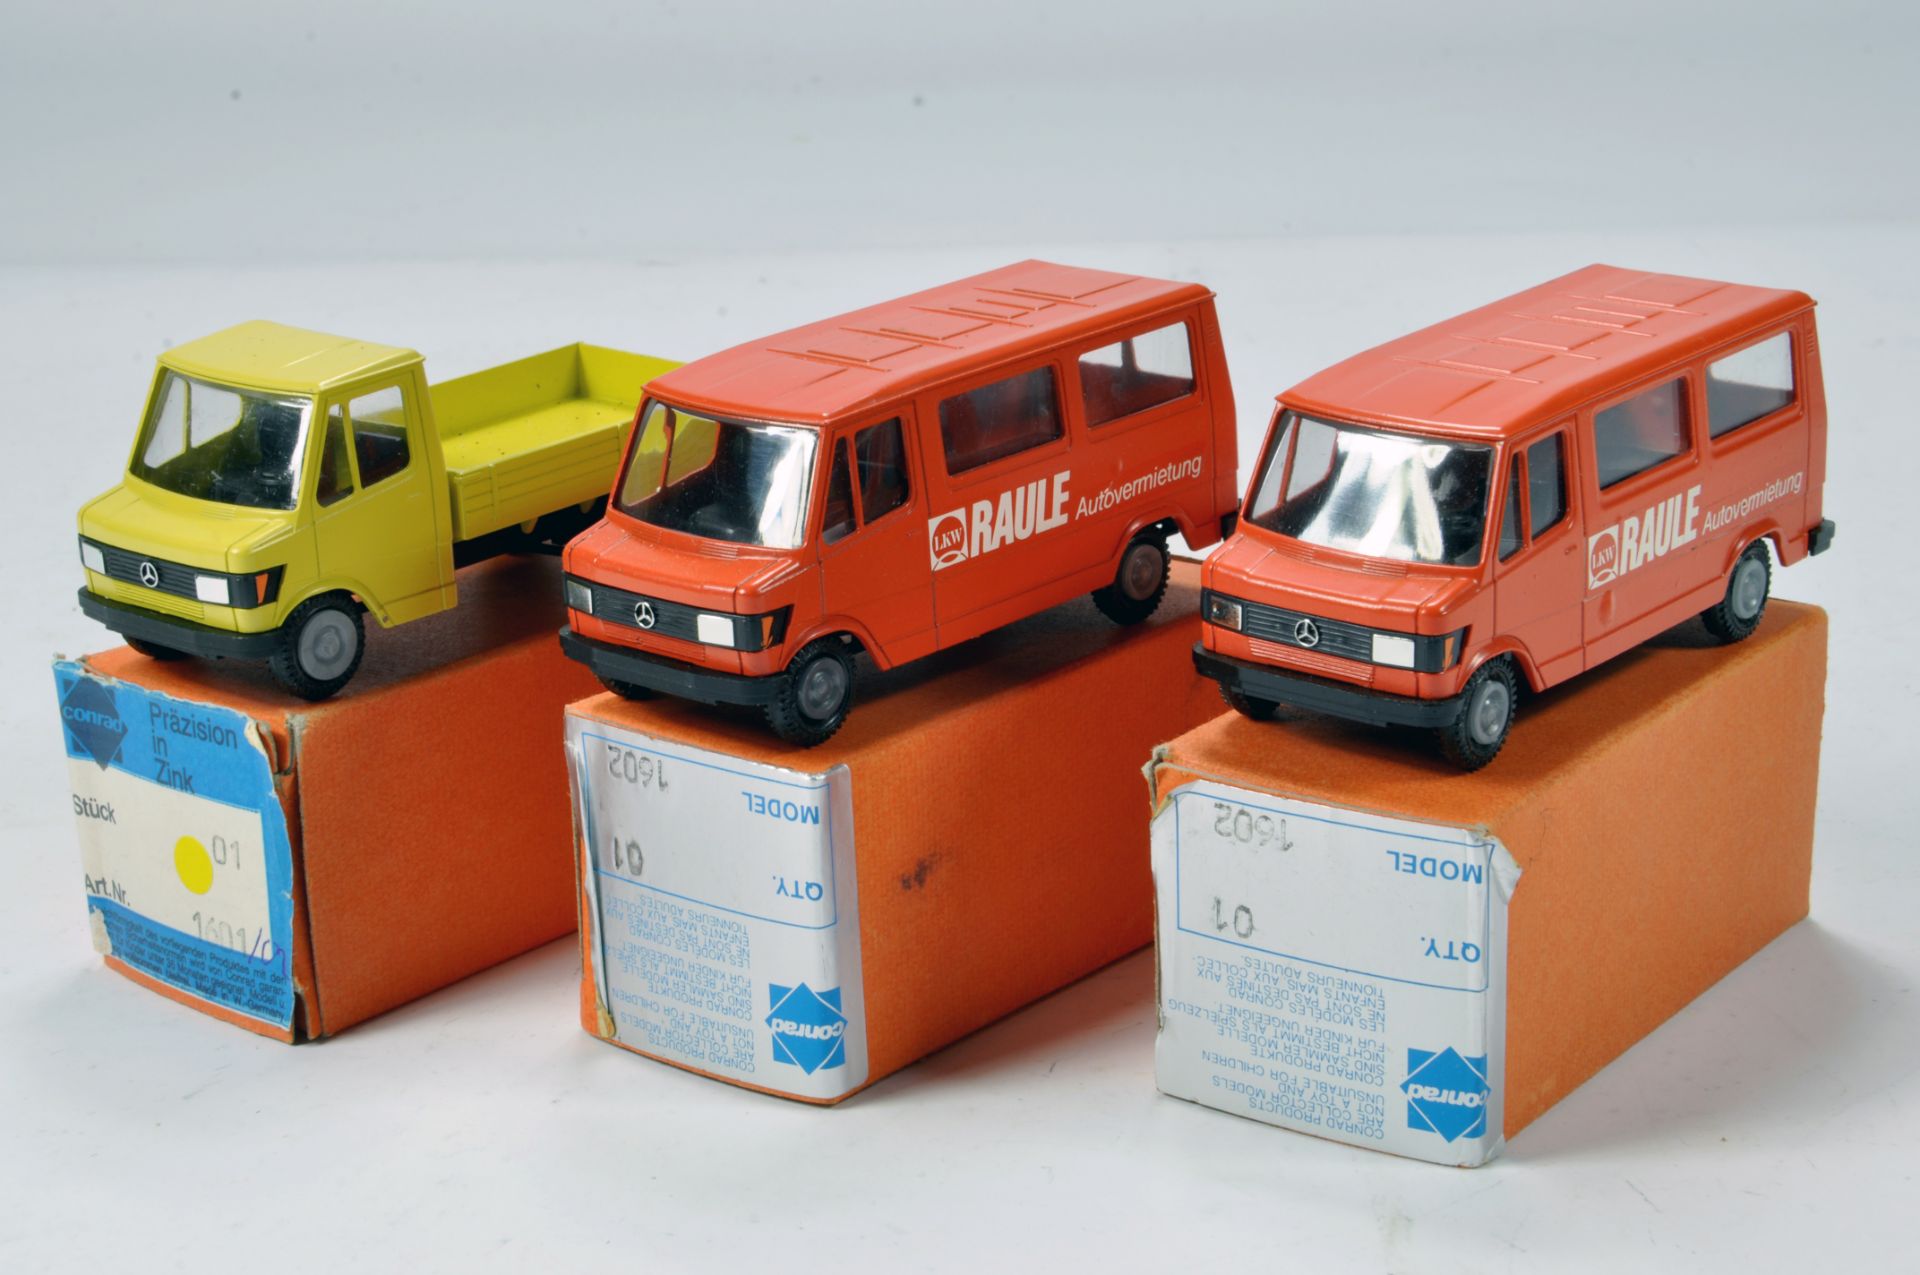 Conrad 1/50 Construction Diecast No. 1601 / 1602 Mercedes Benz Vans. Scarce Promotional Issues. E to